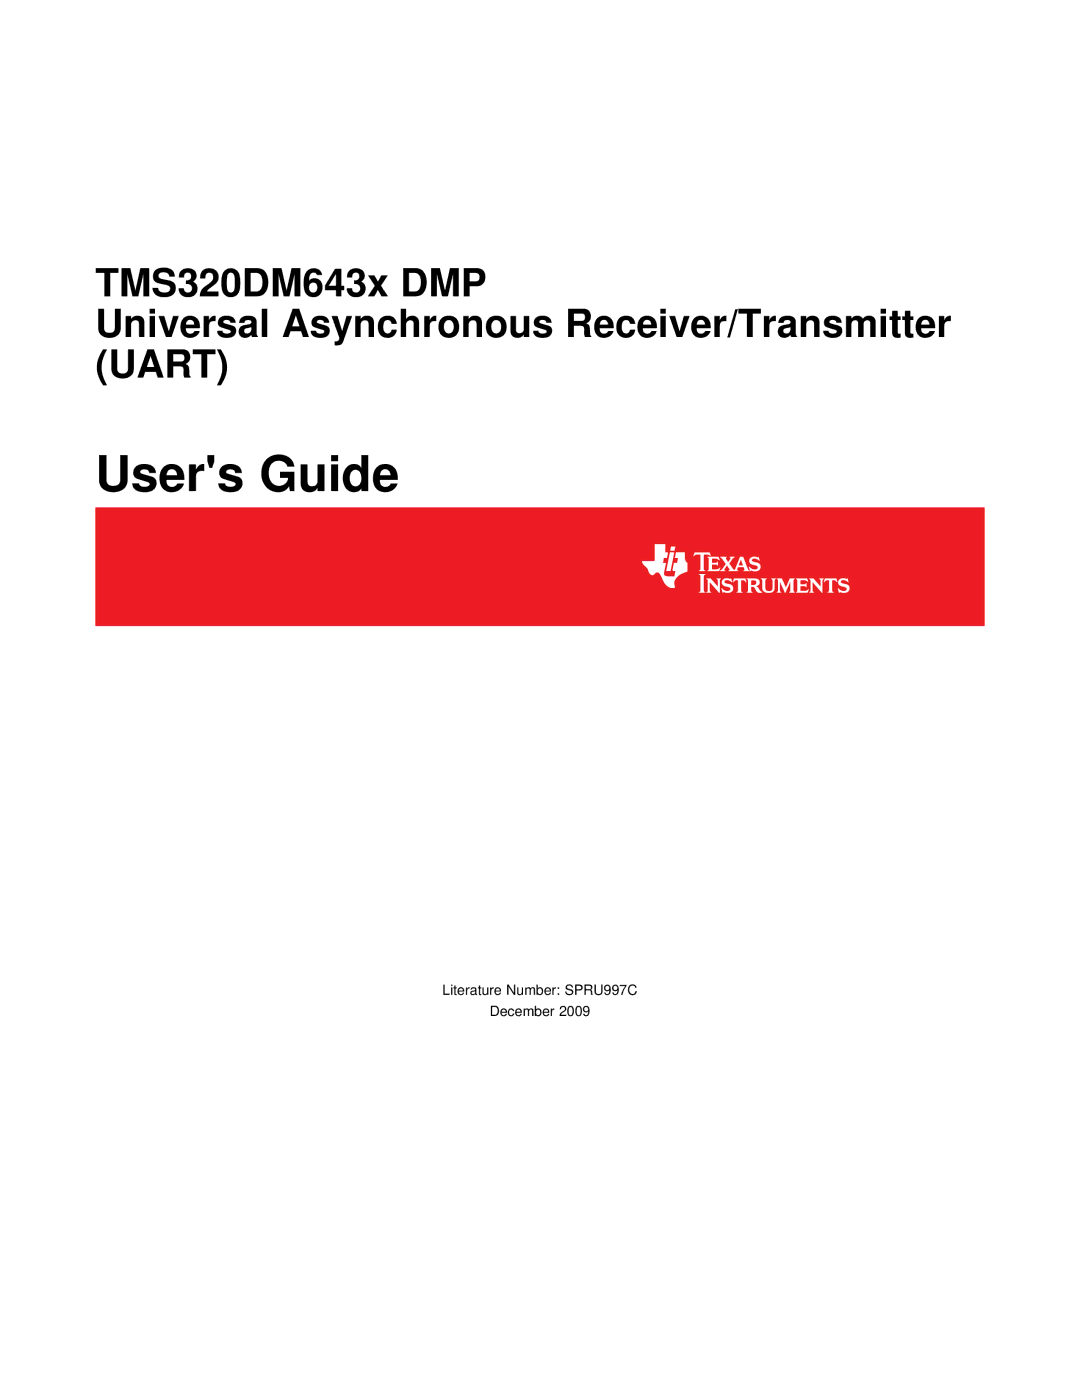 Texas Instruments TMS320DM643X DMP manual Users Guide 